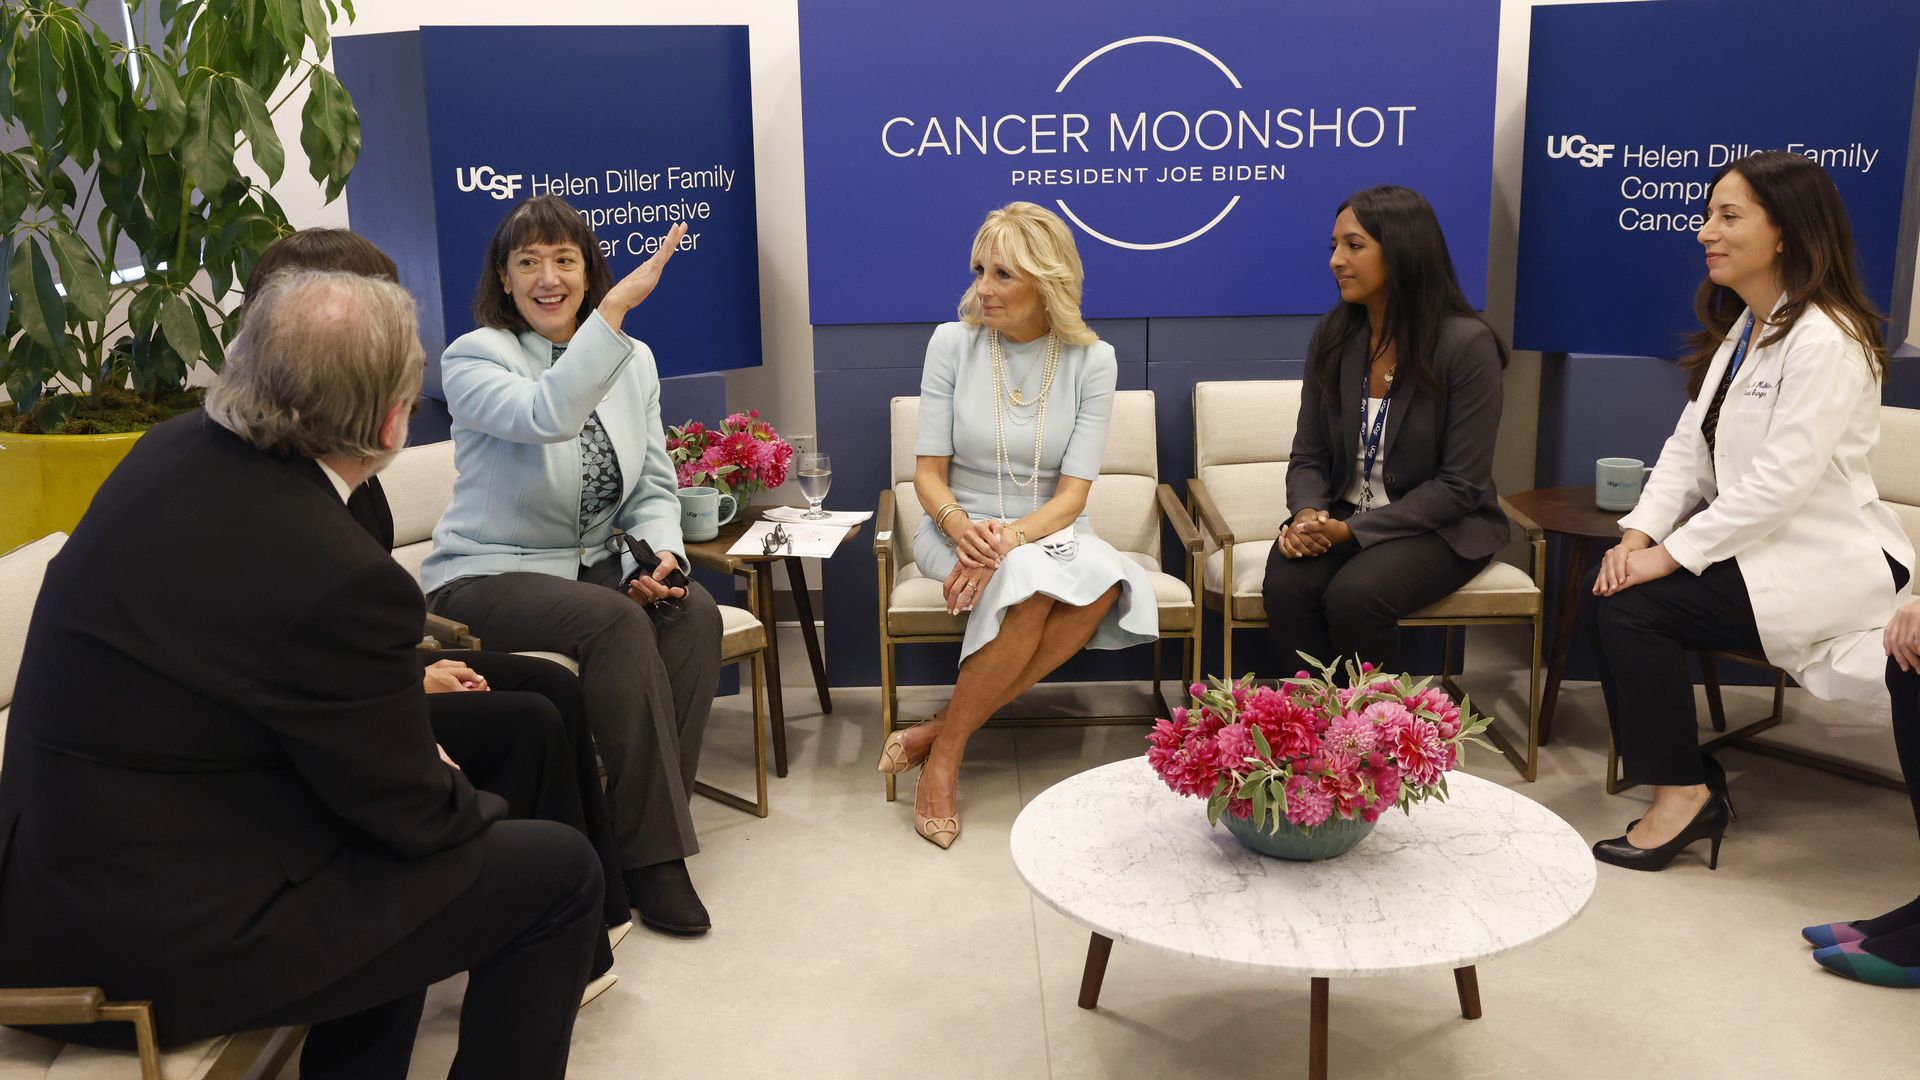 Monica Bertagnolli talks and gestures while Jill Biden looks on at a Cancer Moonshot event